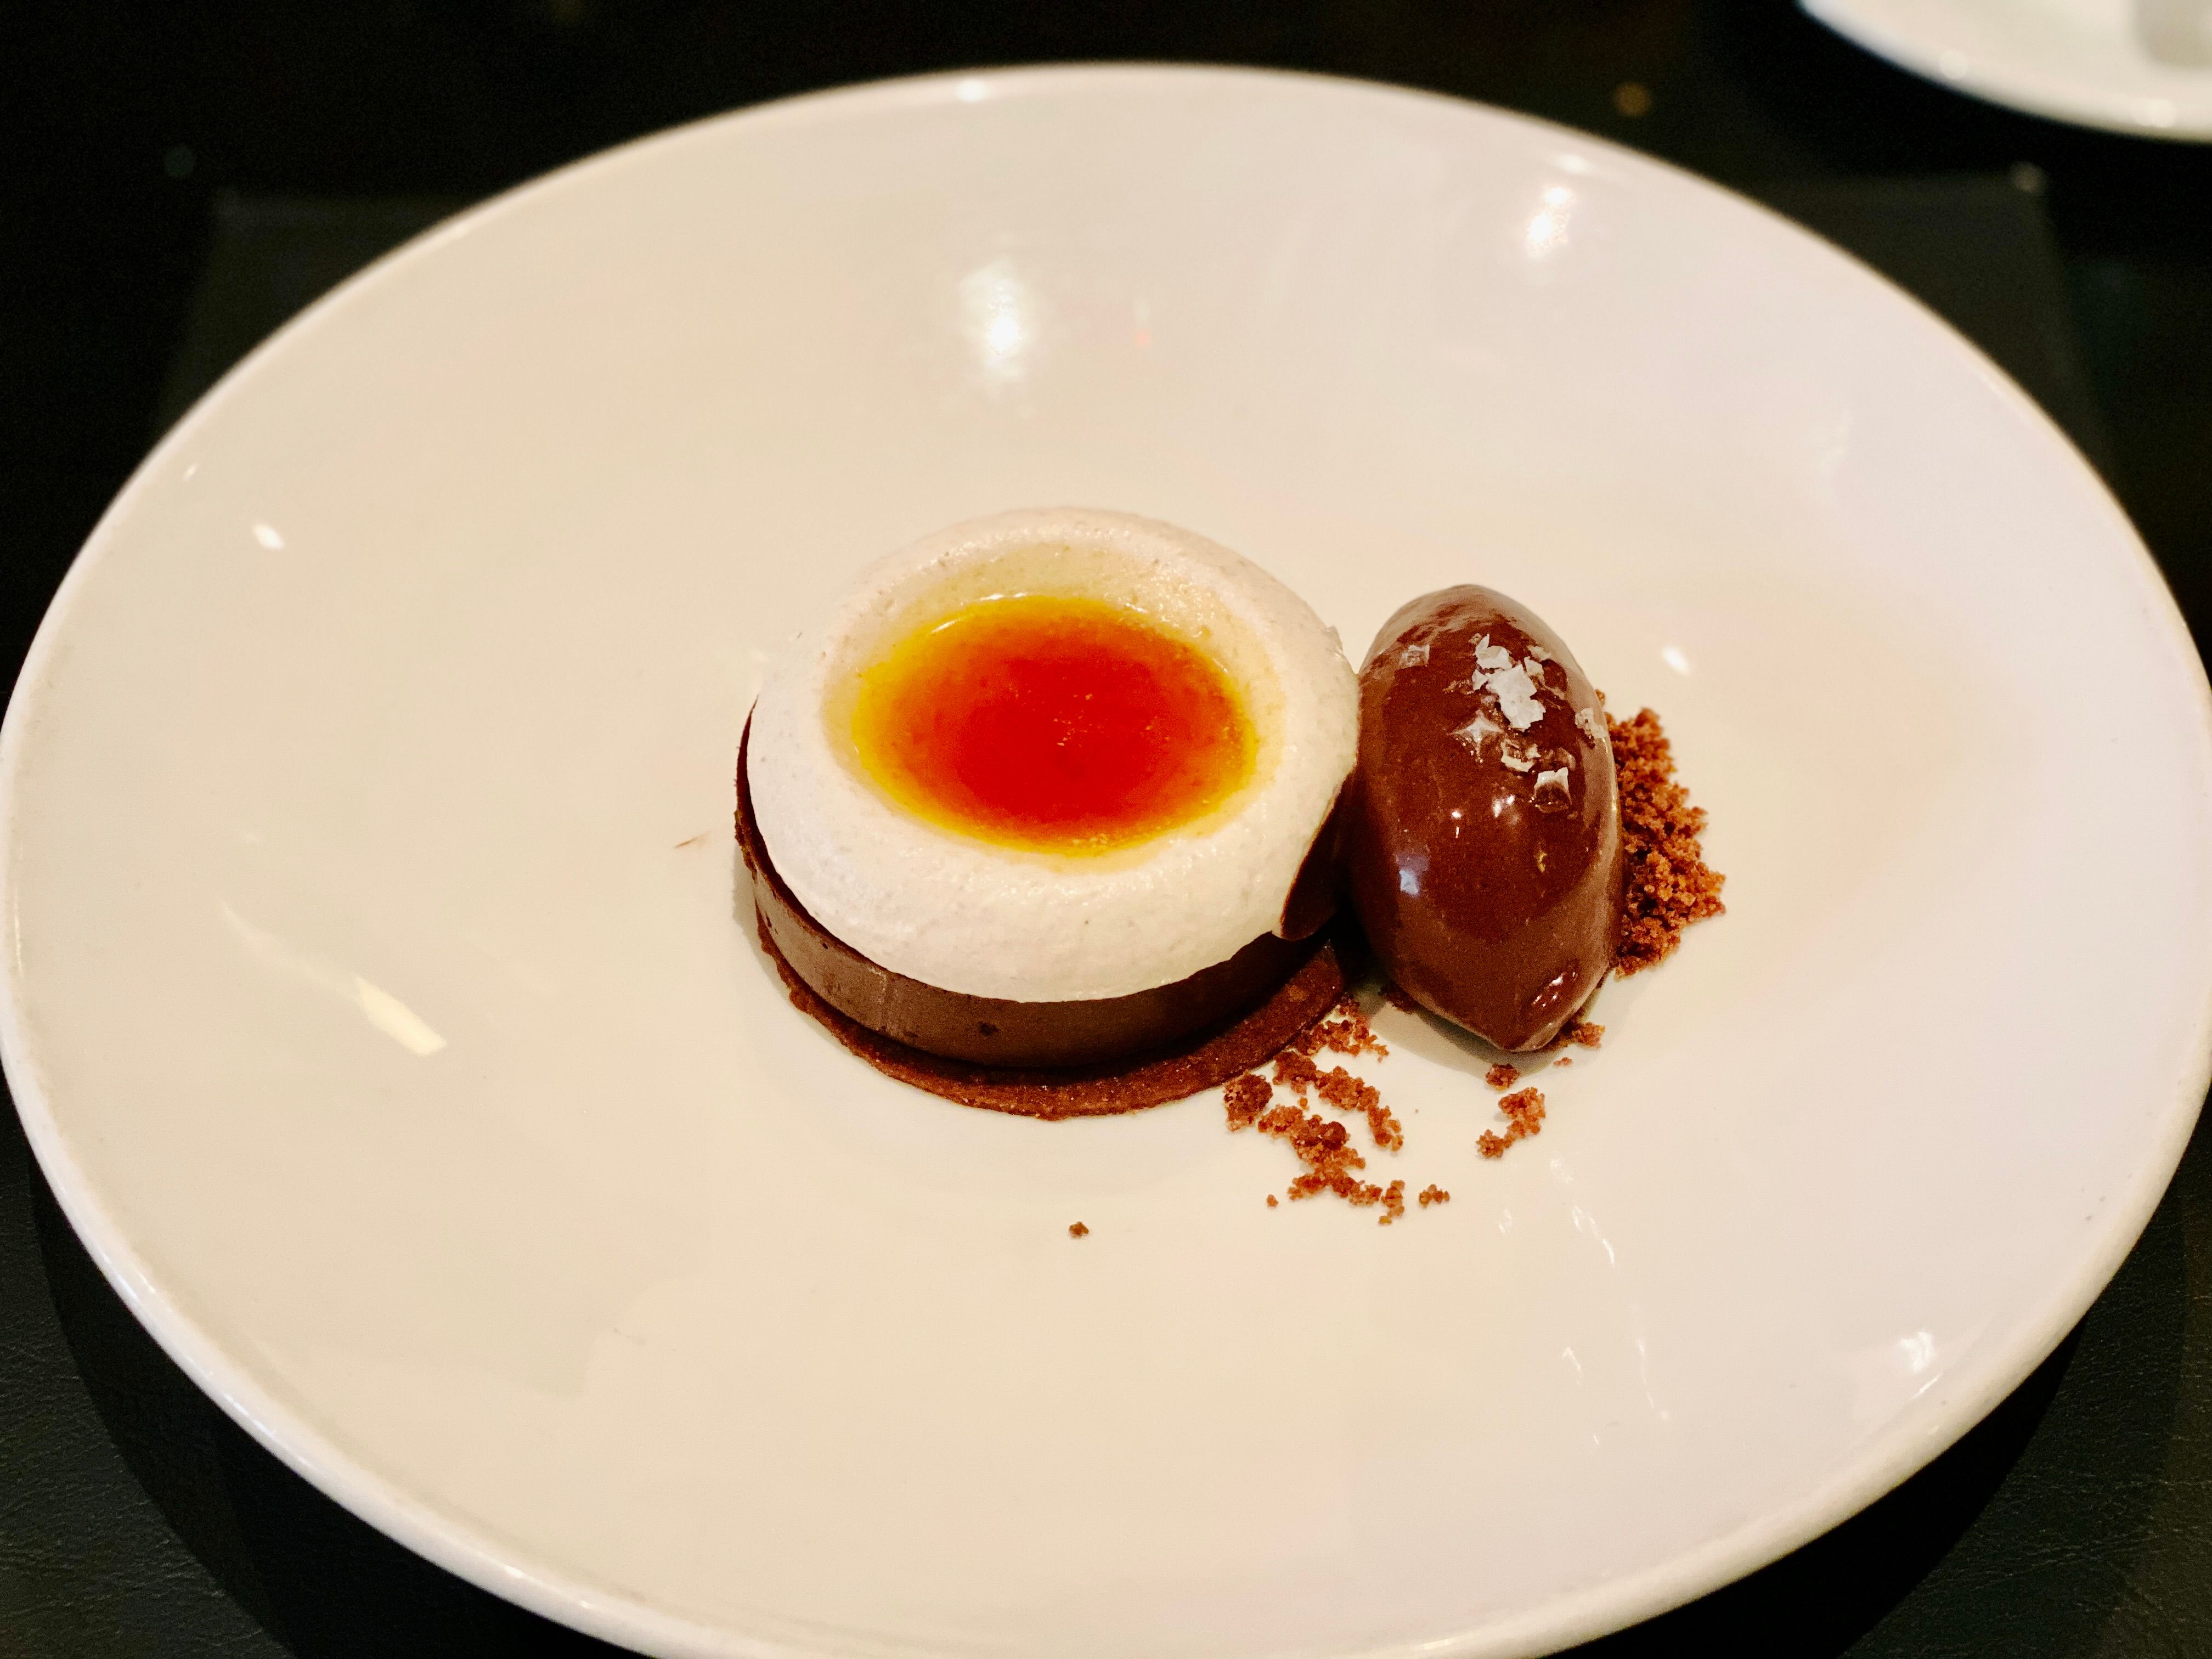 A photo of a chocolate marquise with cream on top like it's a little shallow cup, and whiskey caramel pooled inside the cream. Next to it is some chocolate sorbet.